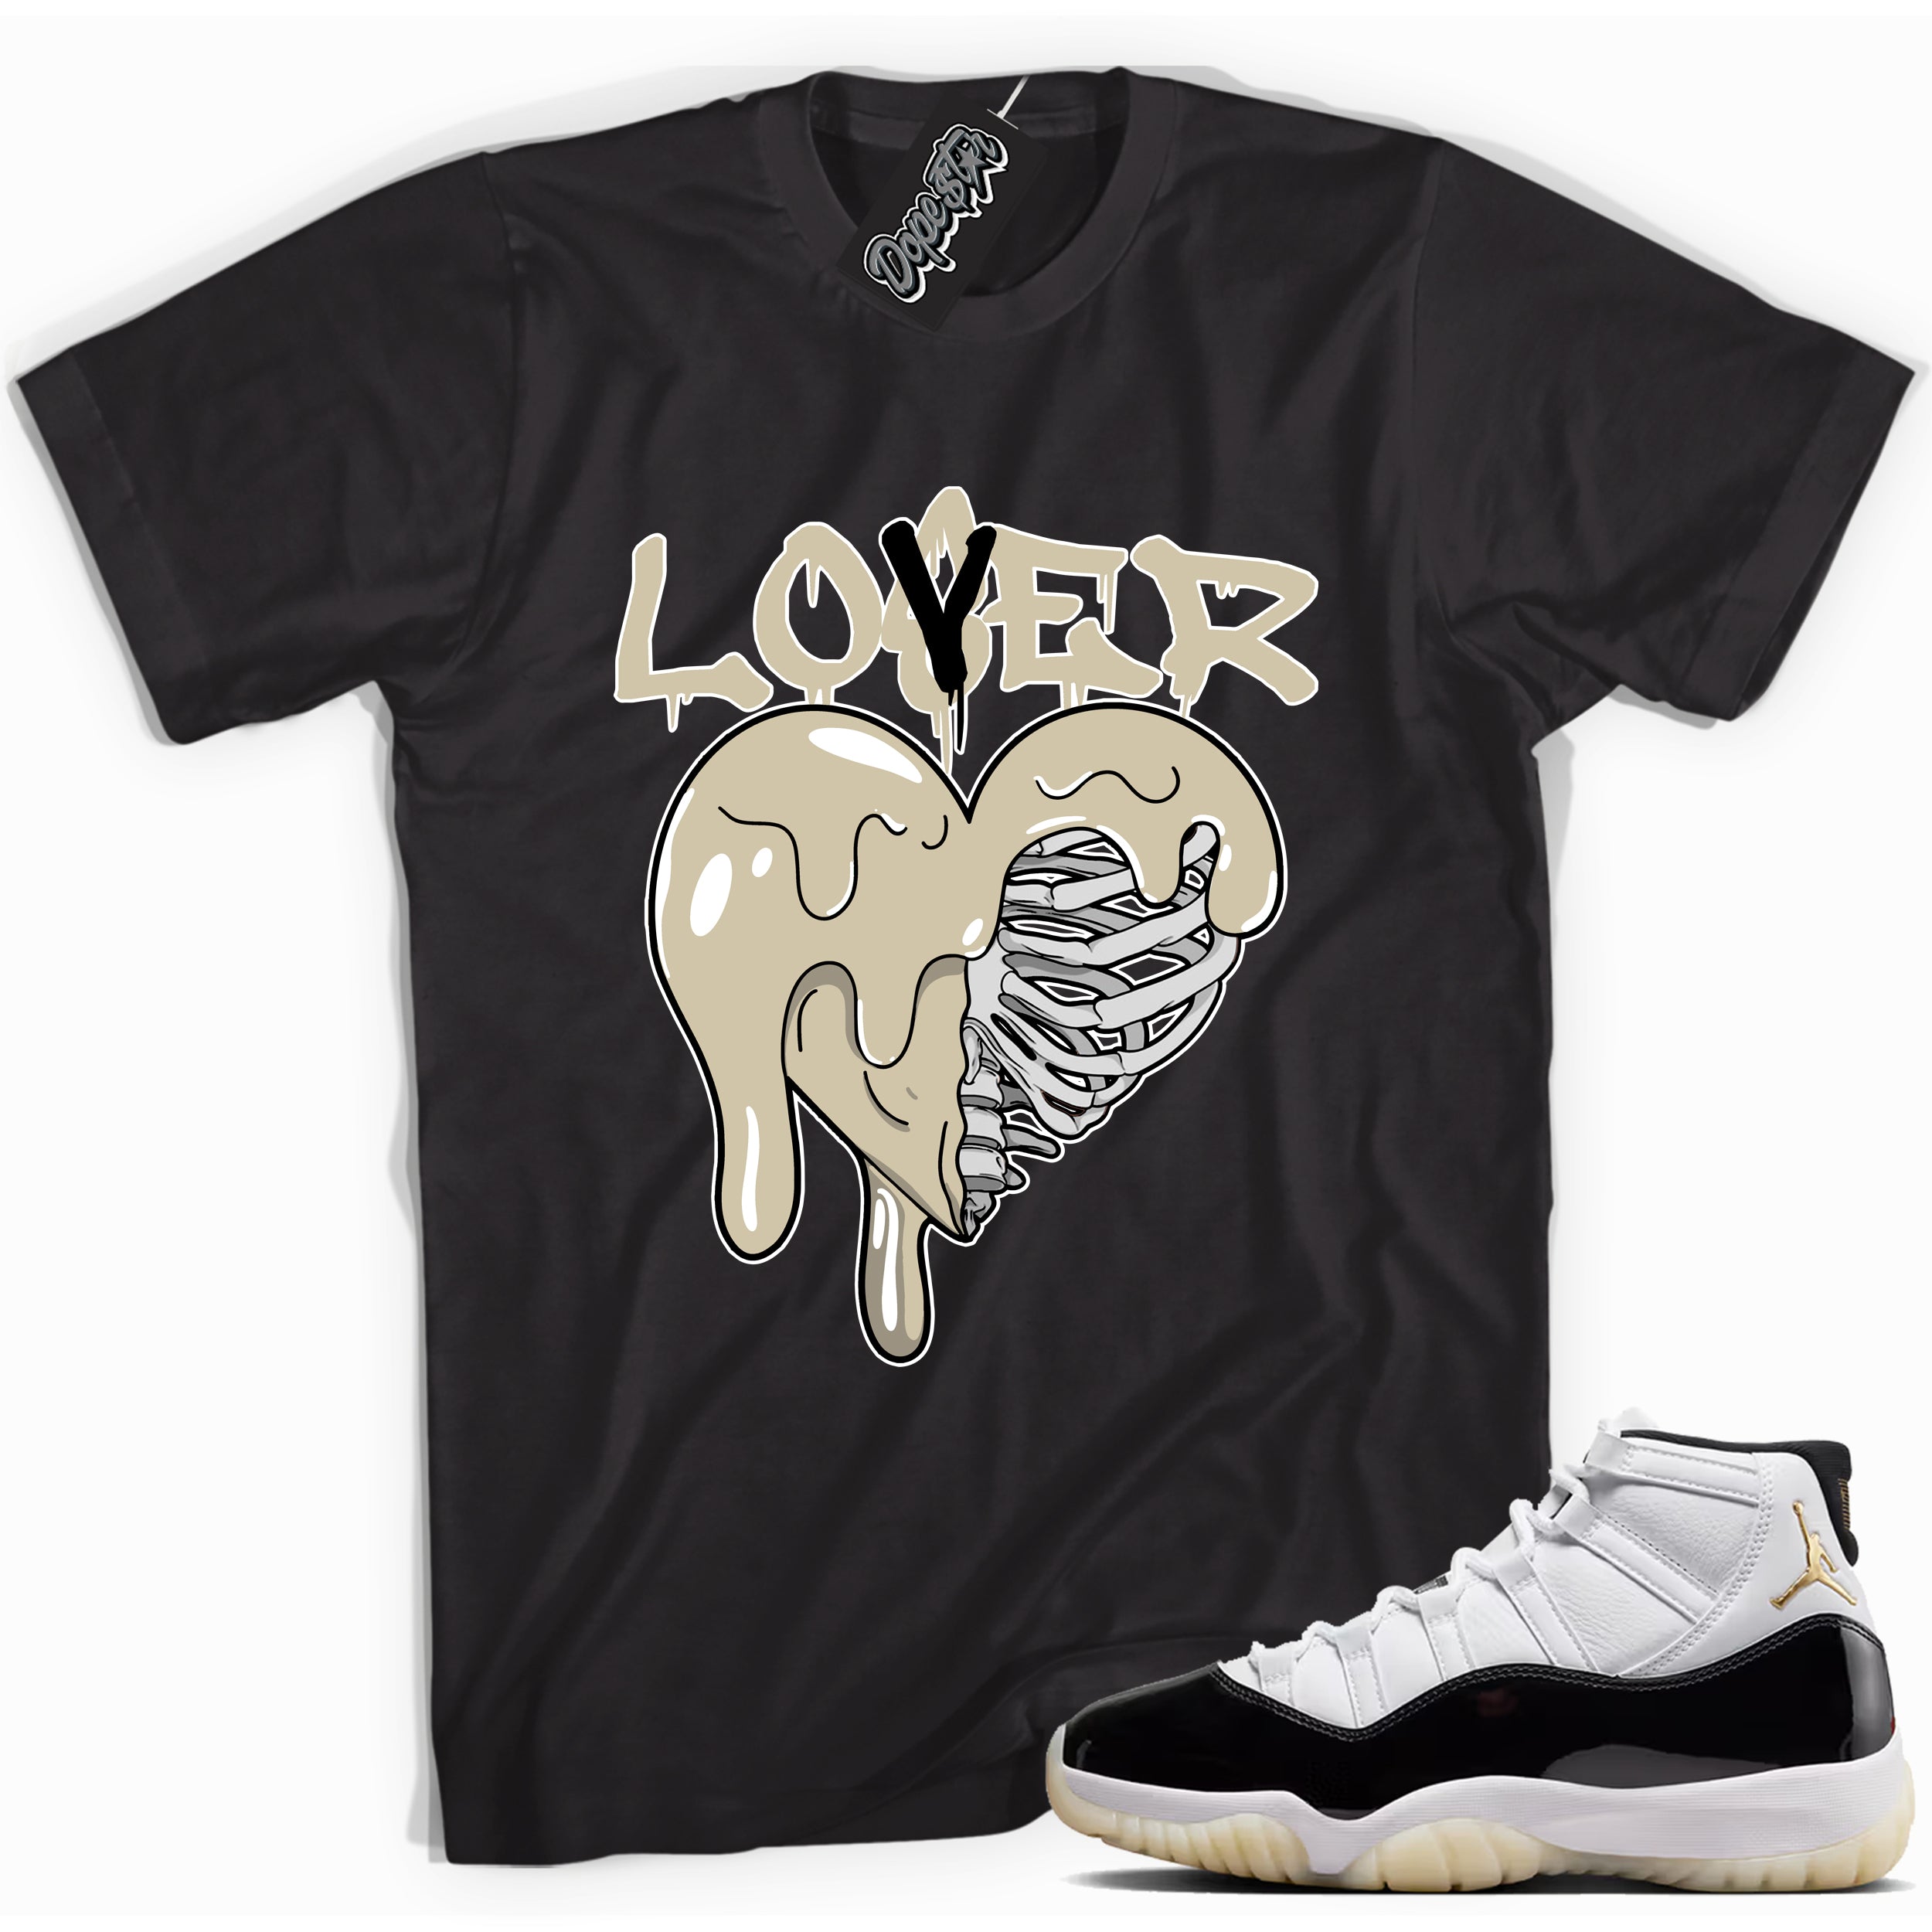 Cool Black graphic tee with “ Lover Loser ” print, that perfectly matches AIR JORDAN 11 GRATITUDE  sneakers 